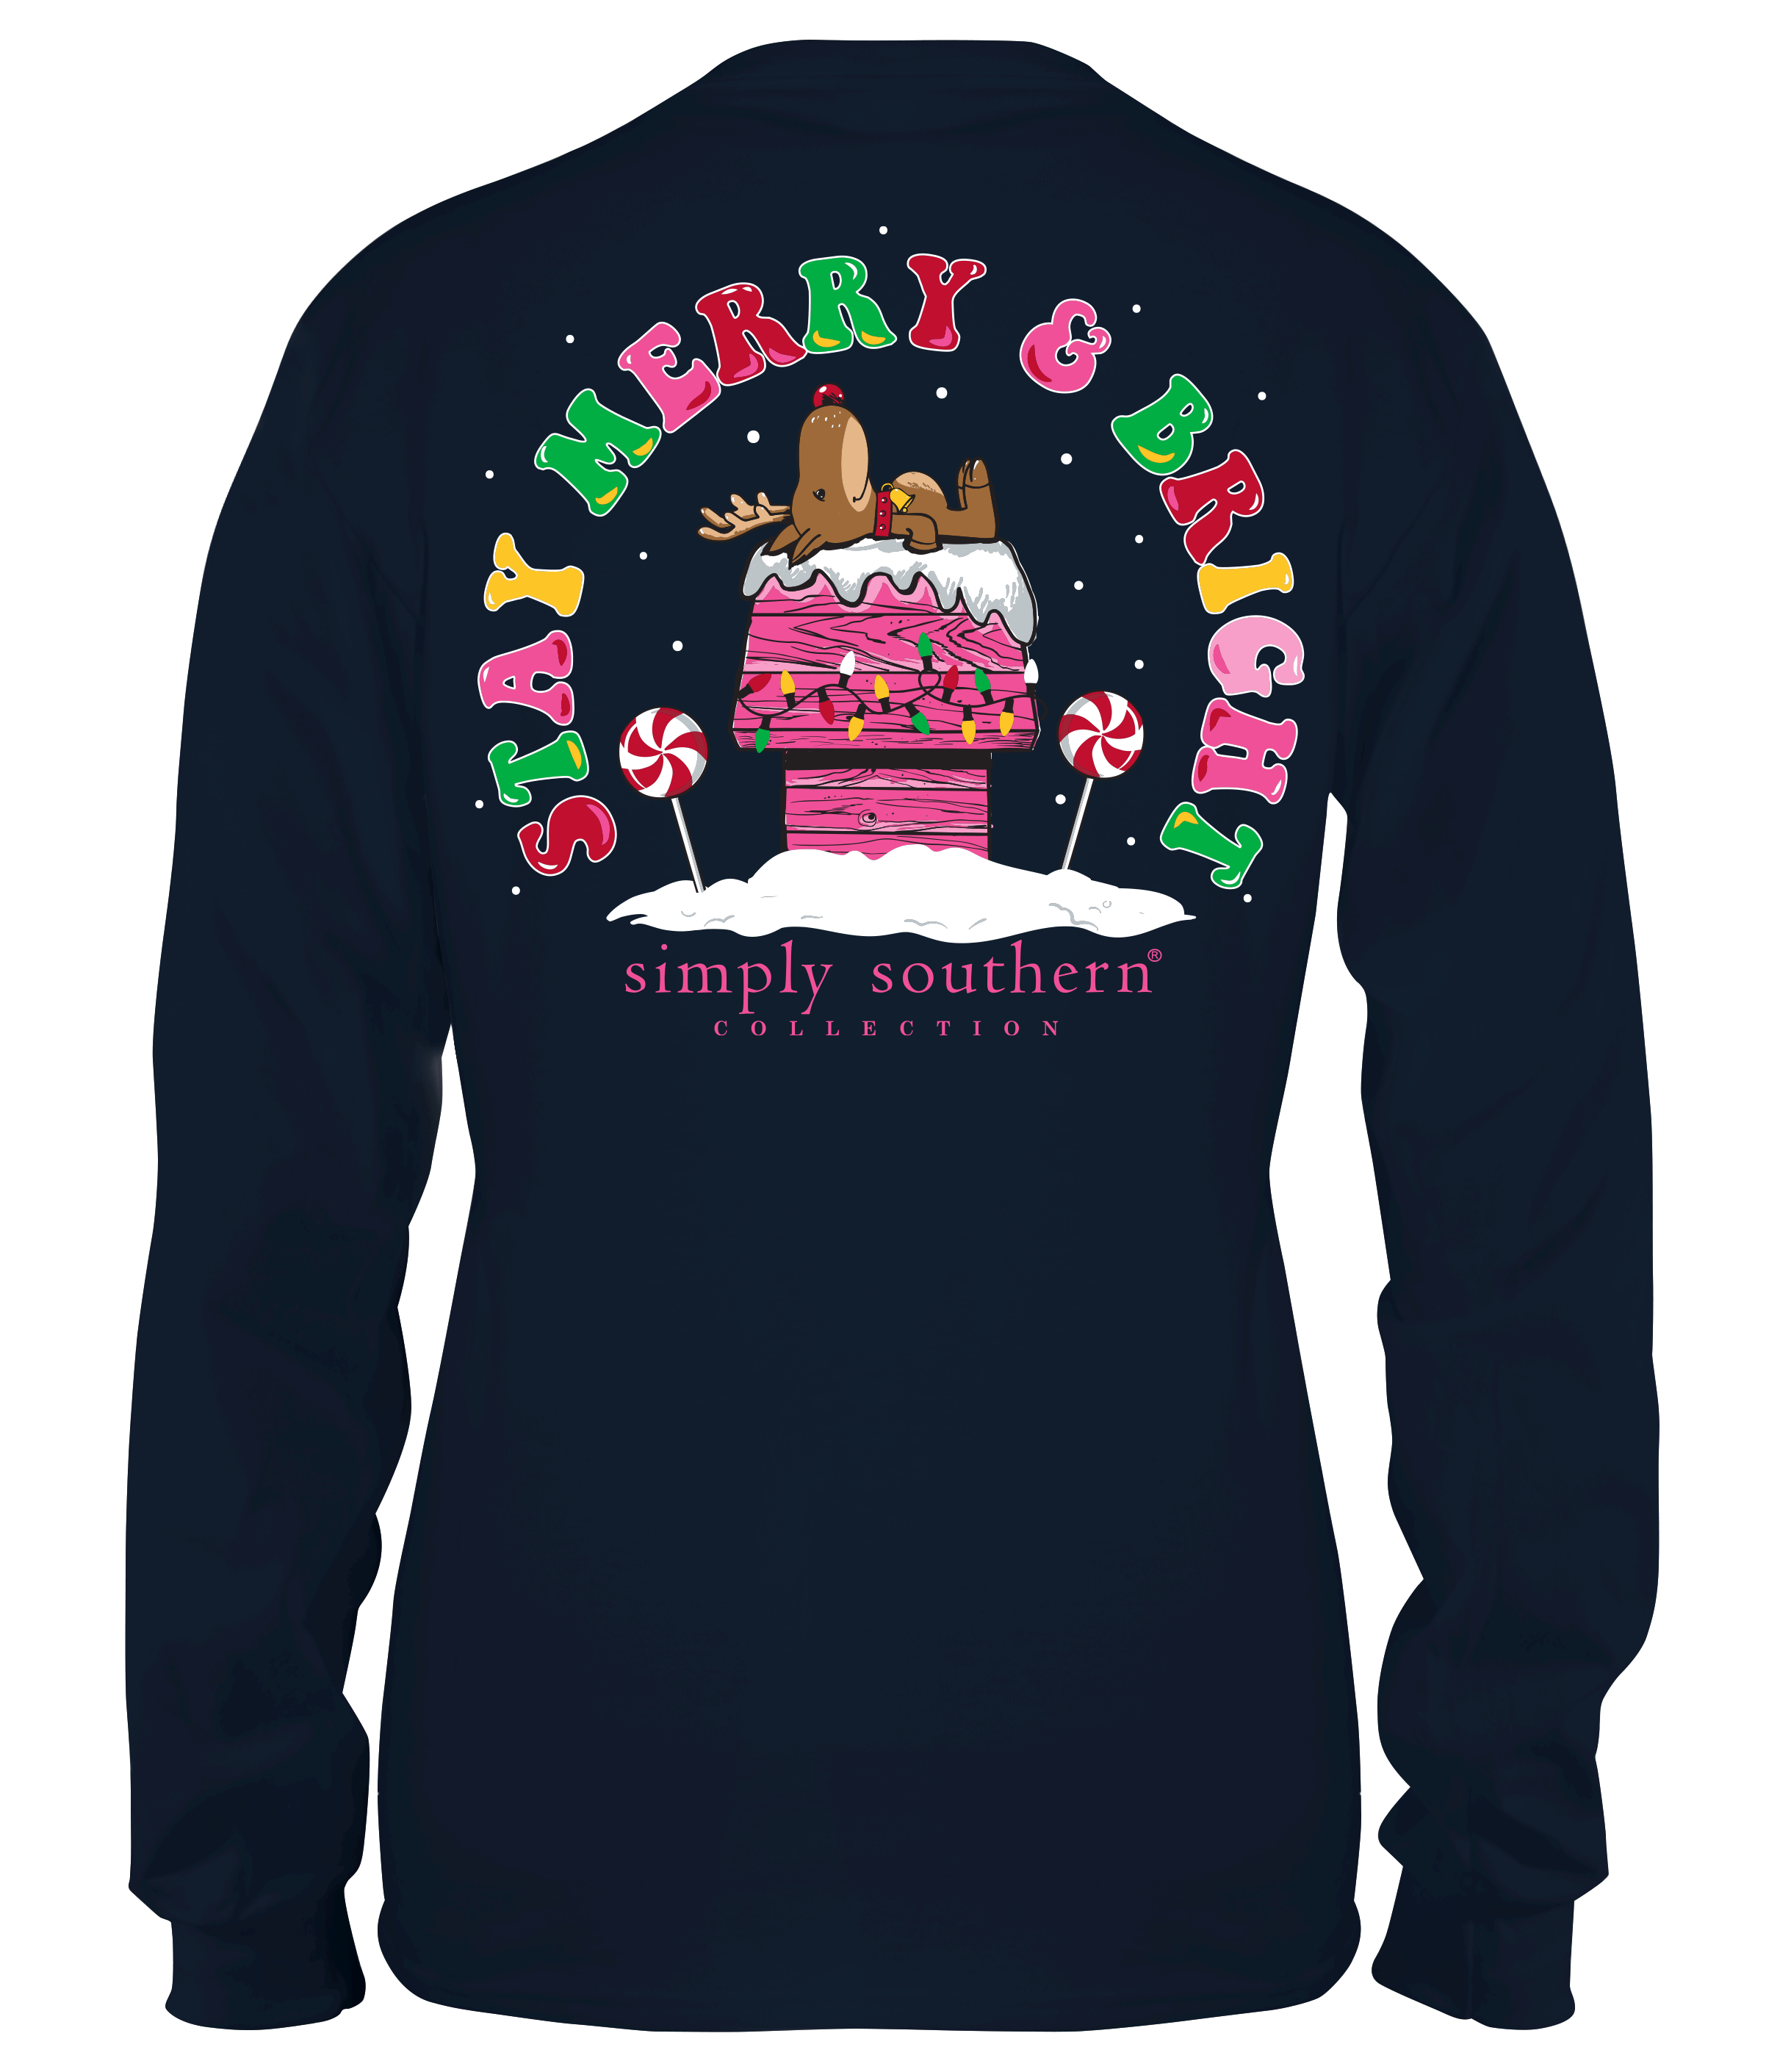 'Stay Merry & Bright' Long Sleeve Tee by Simply Southern